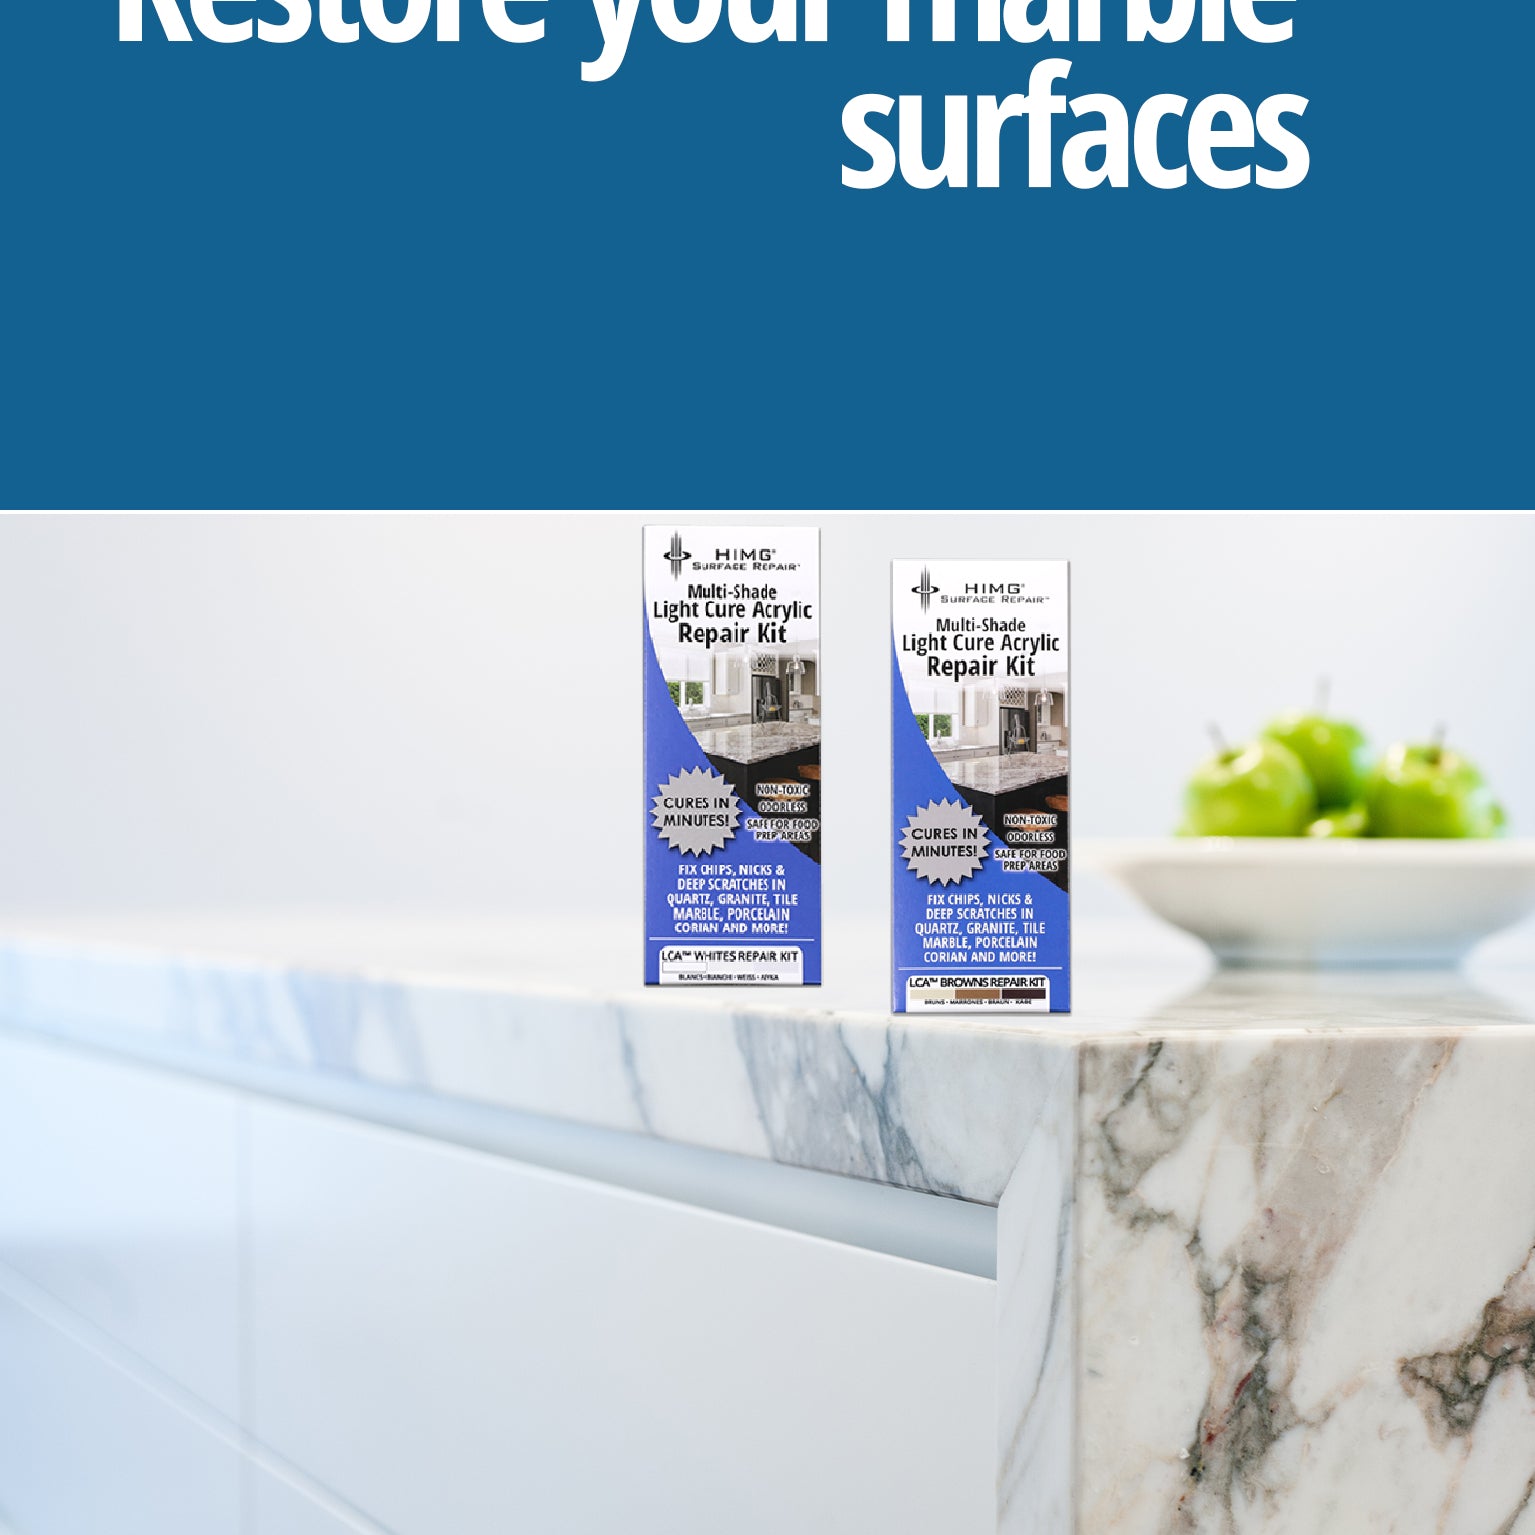 Restore your marble surfaces with HIMG Surface Repair Kits